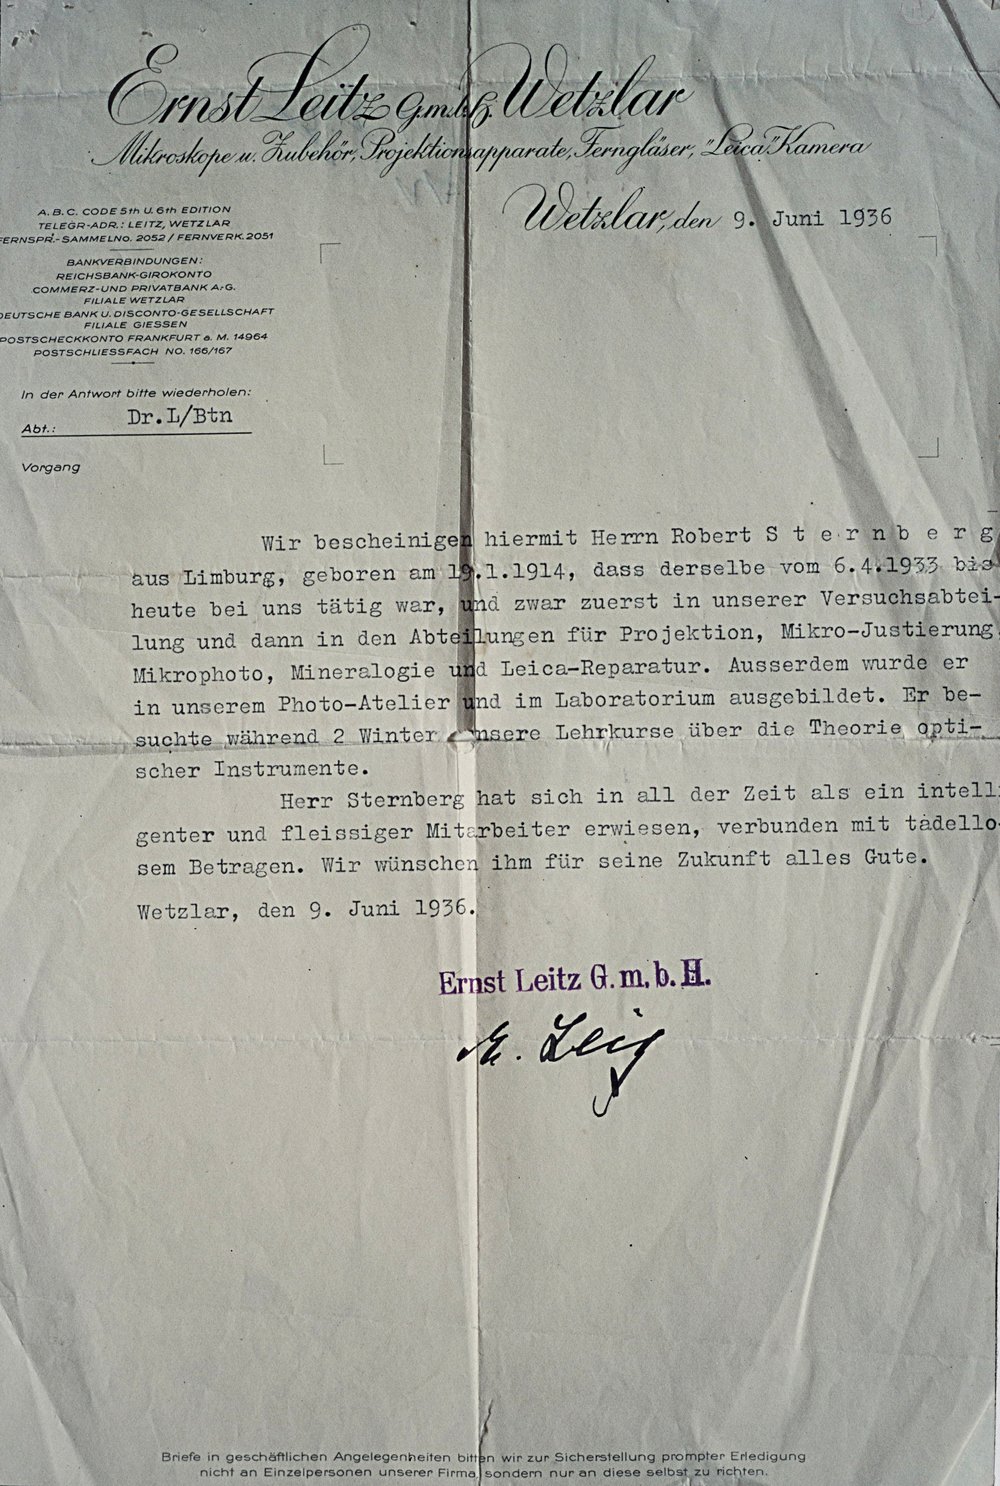   Robert Sternberg left Wetzlar with the blessing of Dr Ernst Leitz II. Apart from providing an introduction to the Ensign Camera Company in London, Dr. Leitz wrote this to-whom-it-may-concern reference. It reads:     